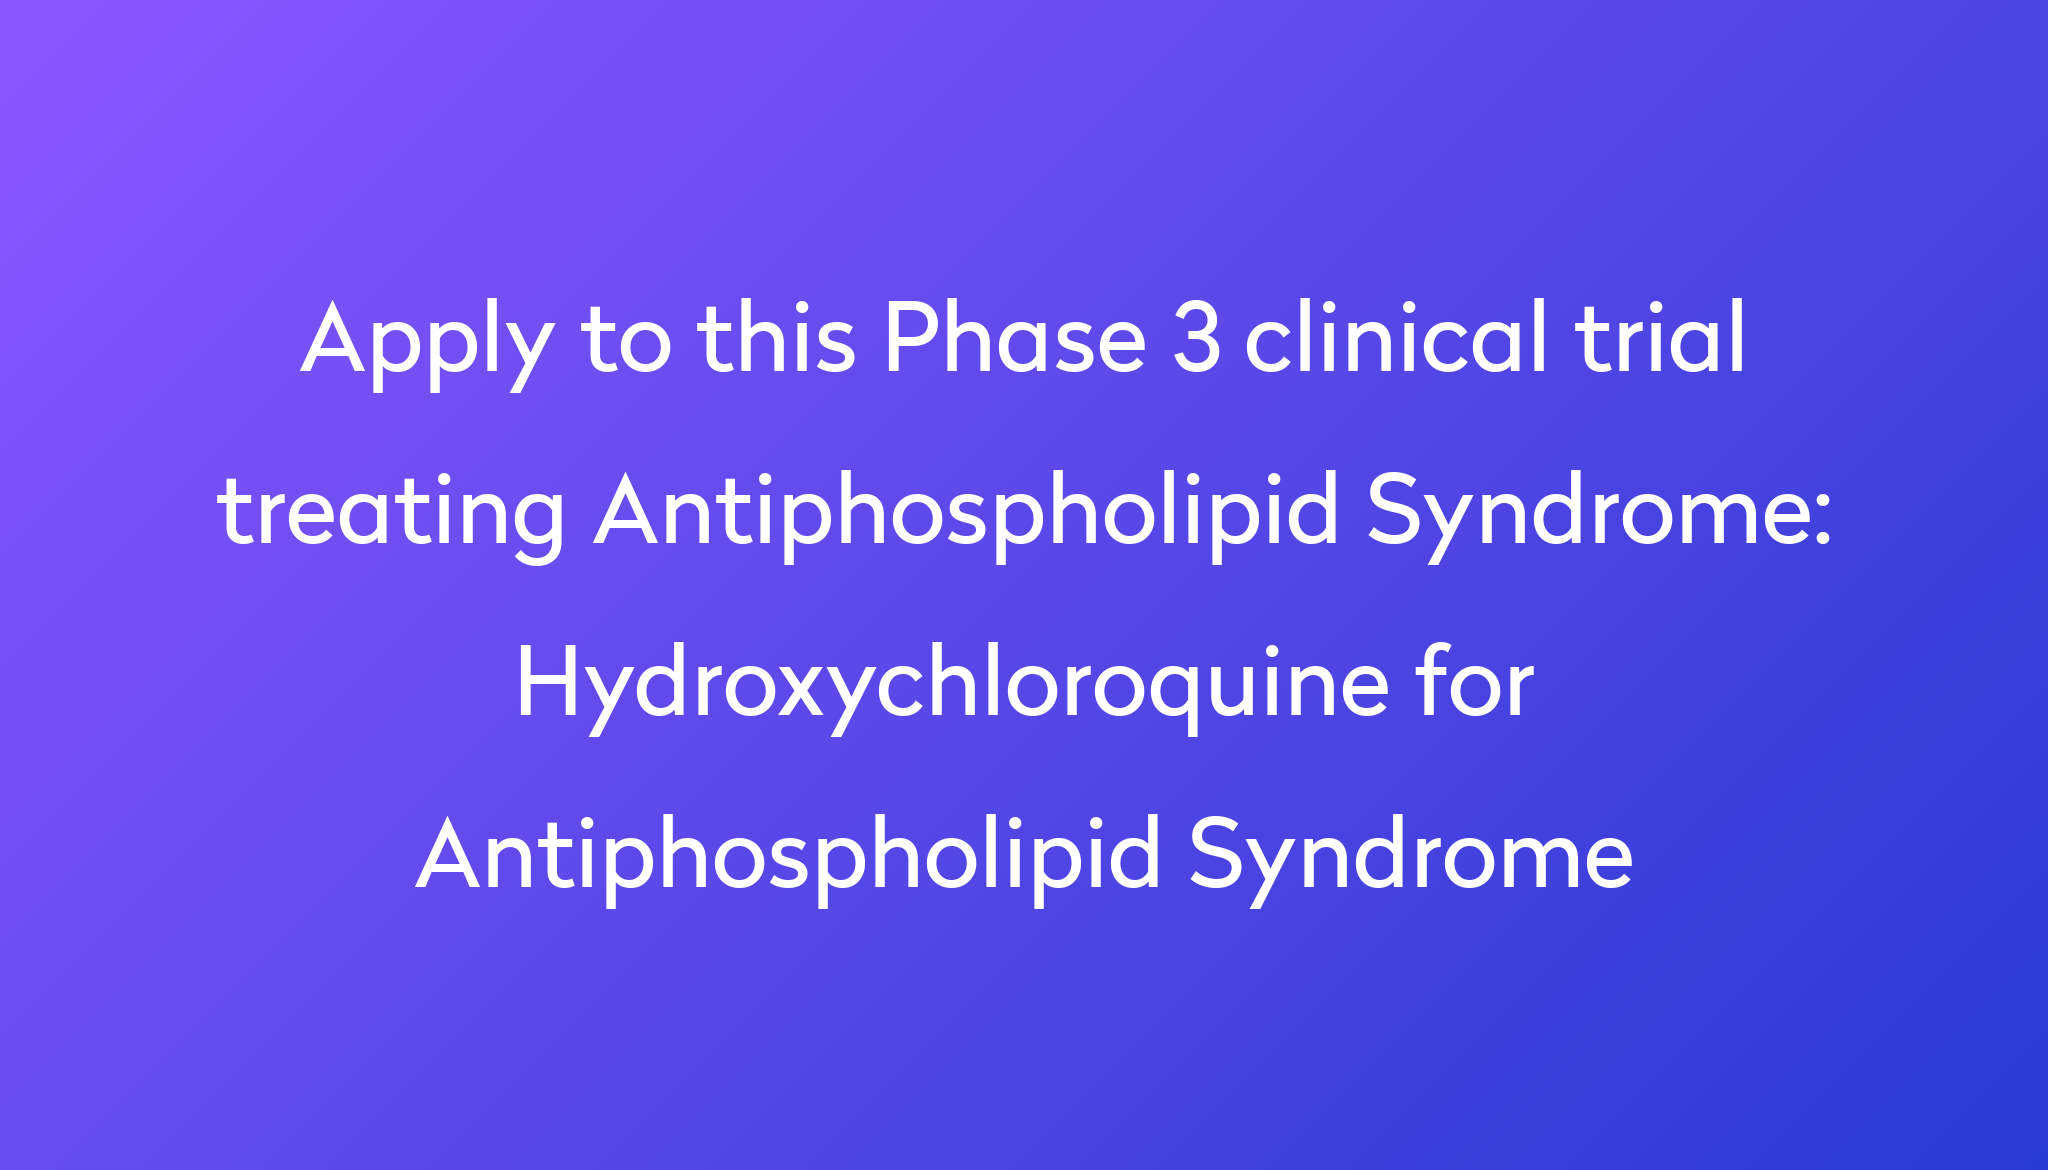 Hydroxychloroquine for Antiphospholipid Syndrome Clinical Trial 2023